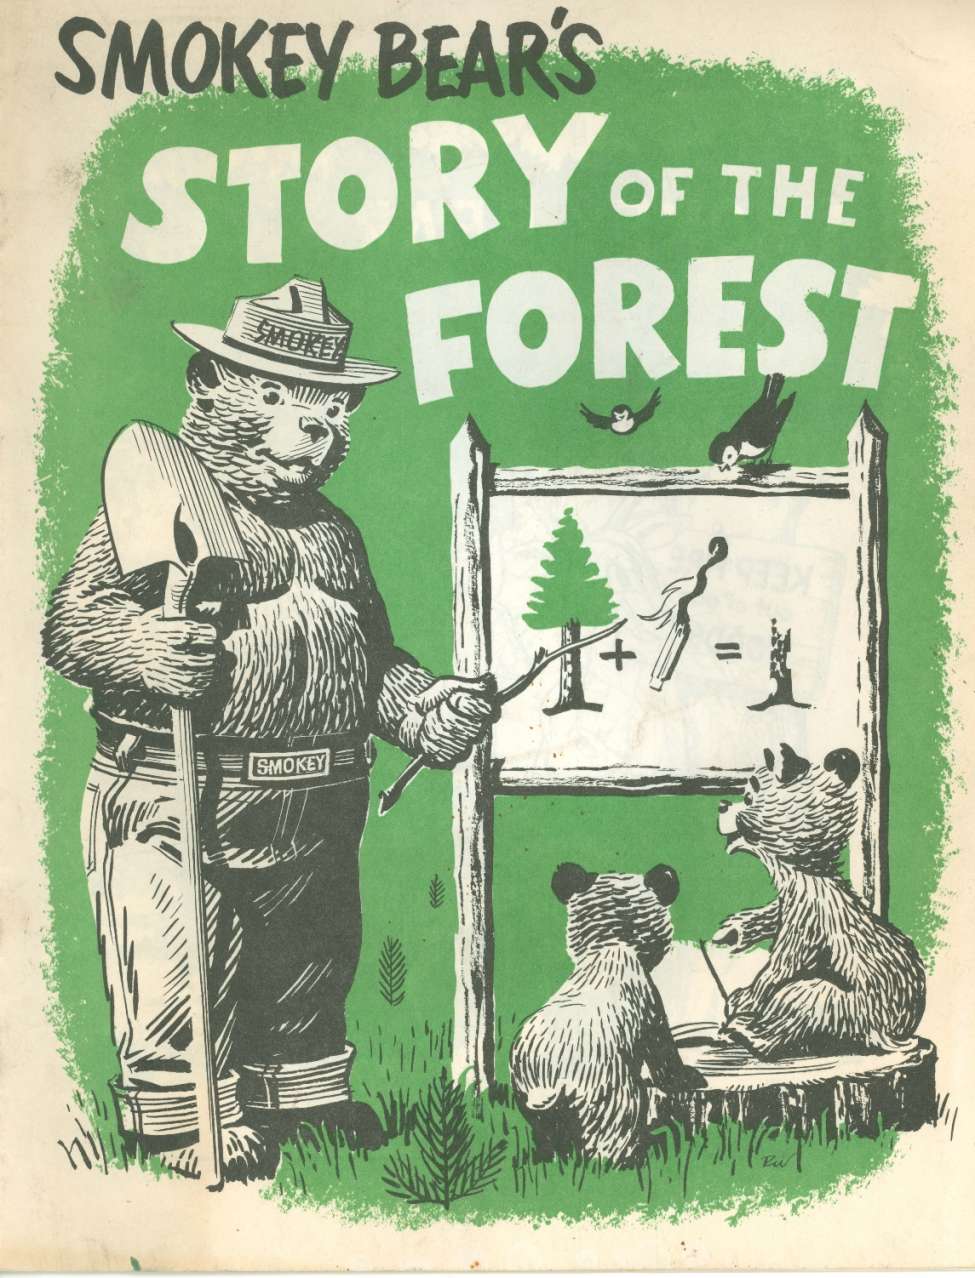 Book Cover For Smokey Bears Story Of The Forest